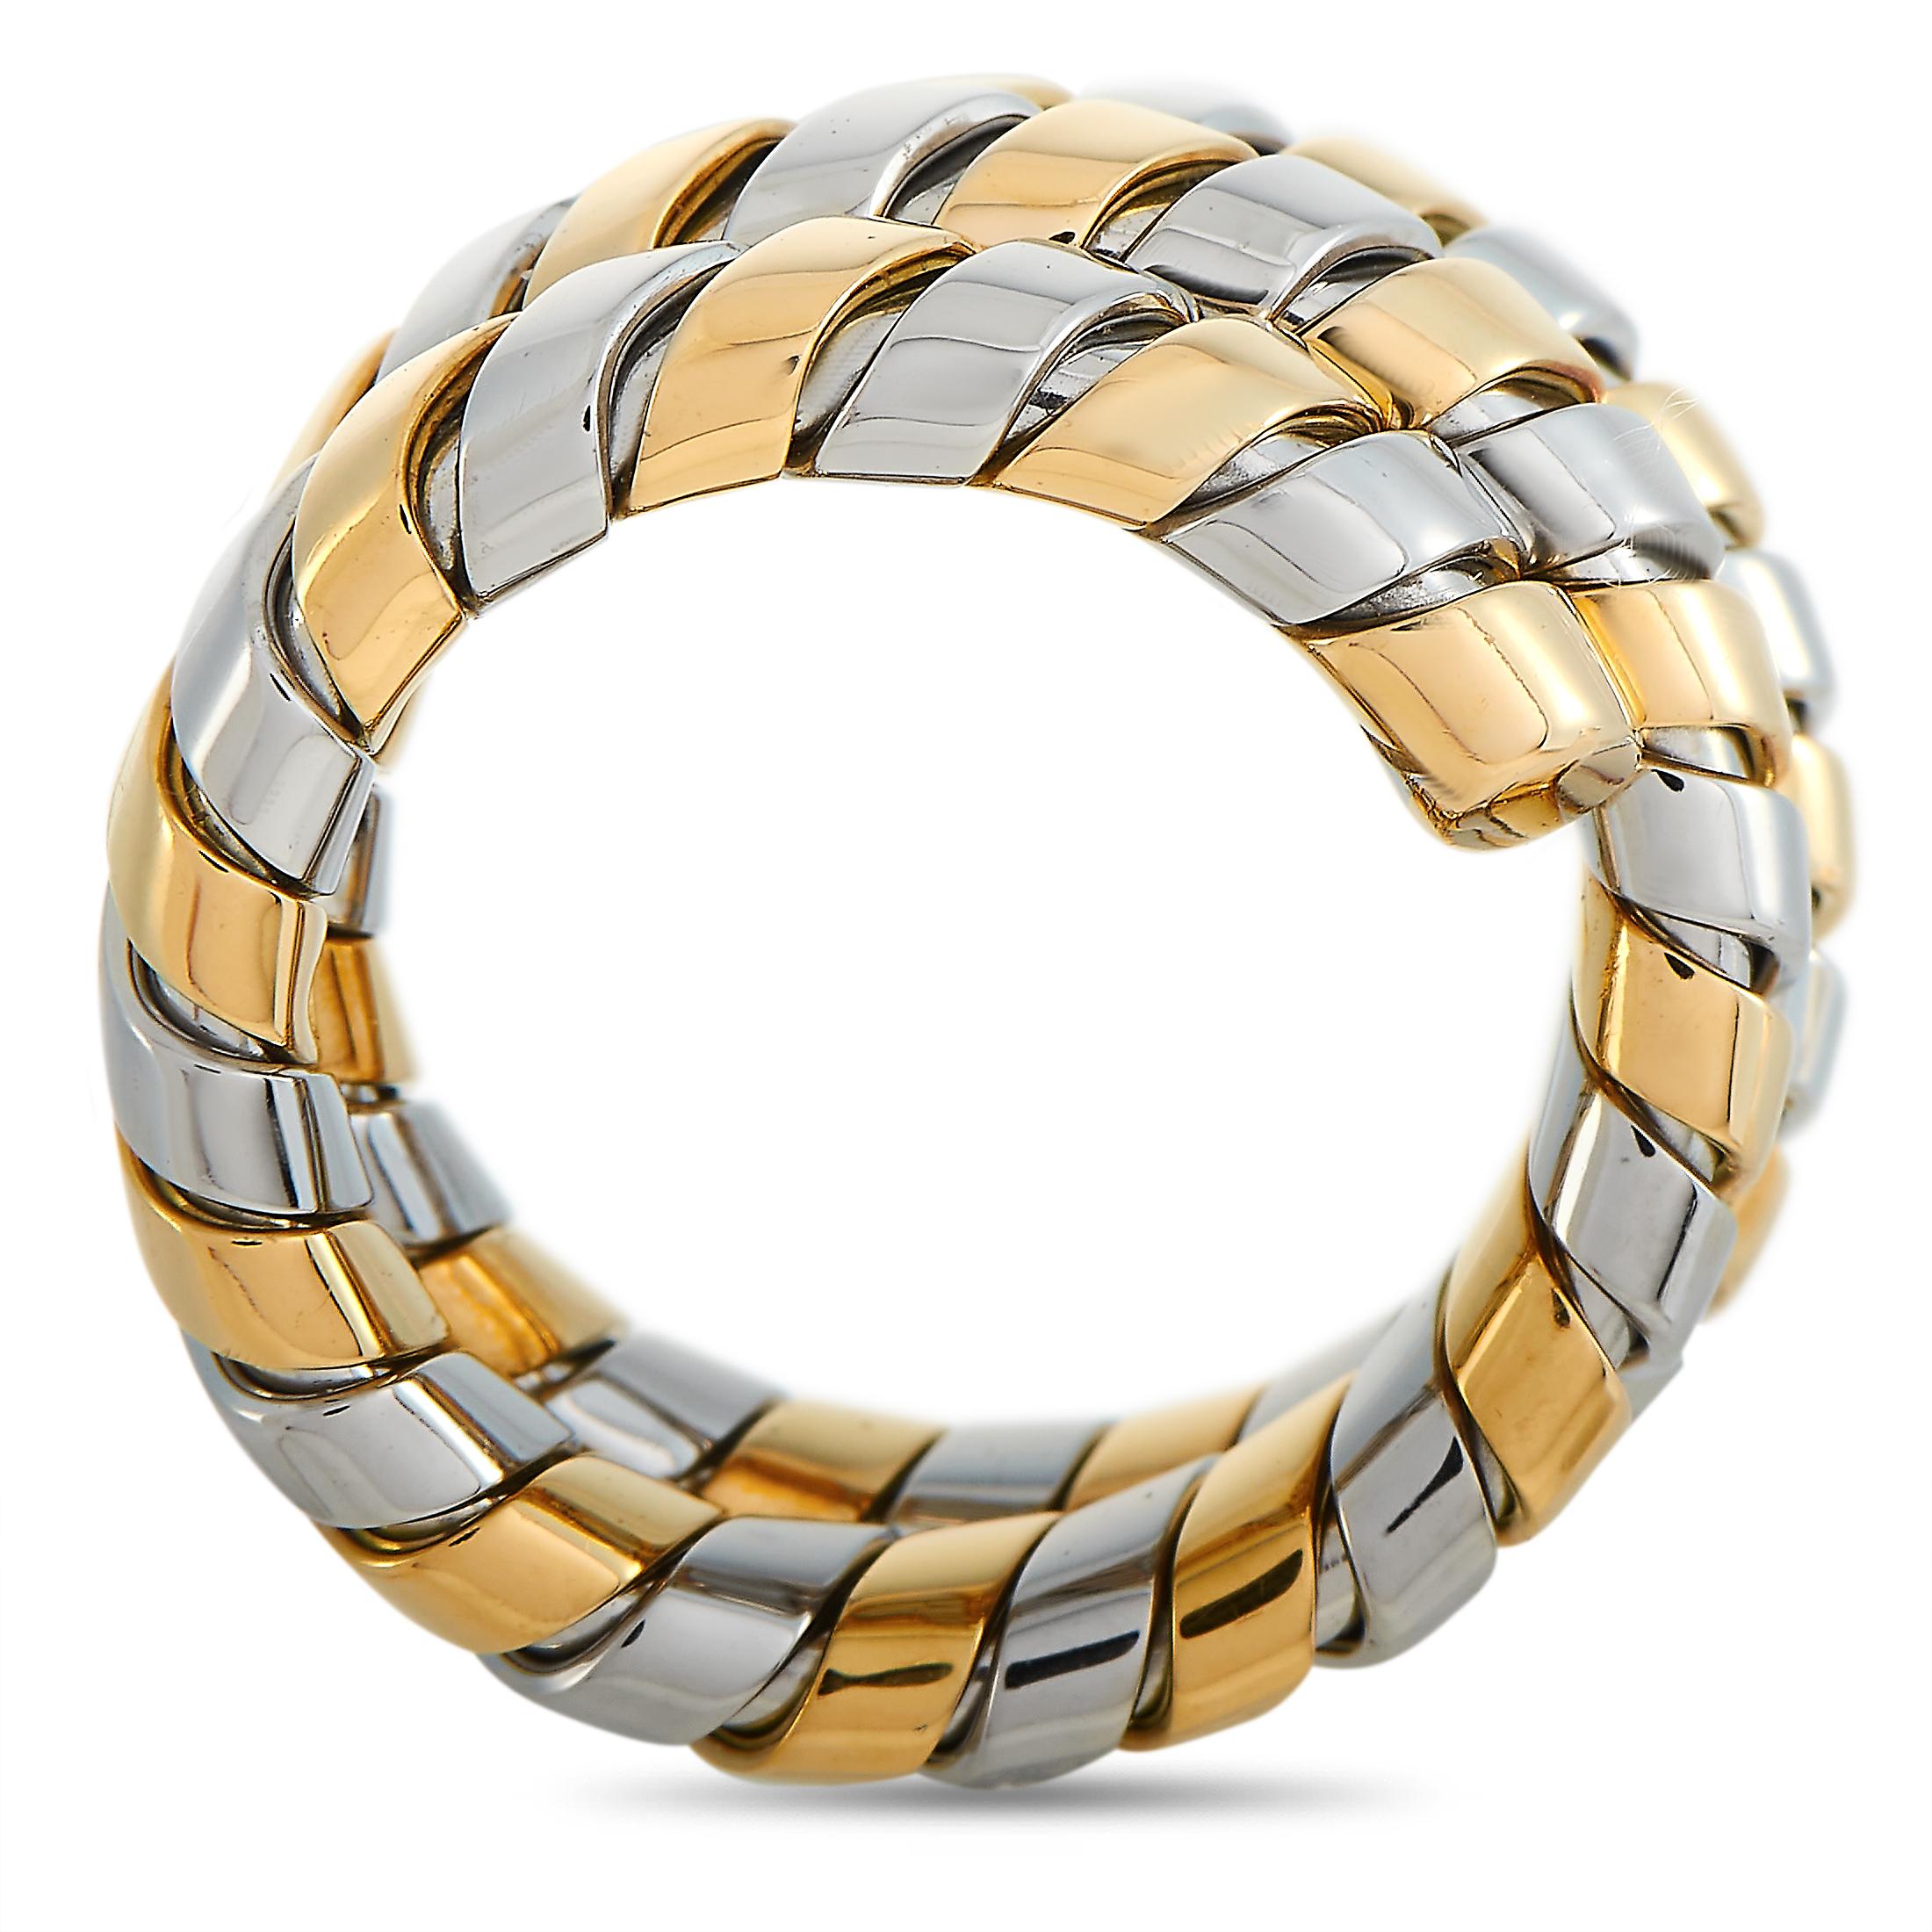 This Bvlgari tubogas ring is made out of 18K yellow gold and stainless steel and weighs 10.1 grams, boasting band thickness of 15 mm.

The ring is offered in estate condition and includes the manufacturer’s box.